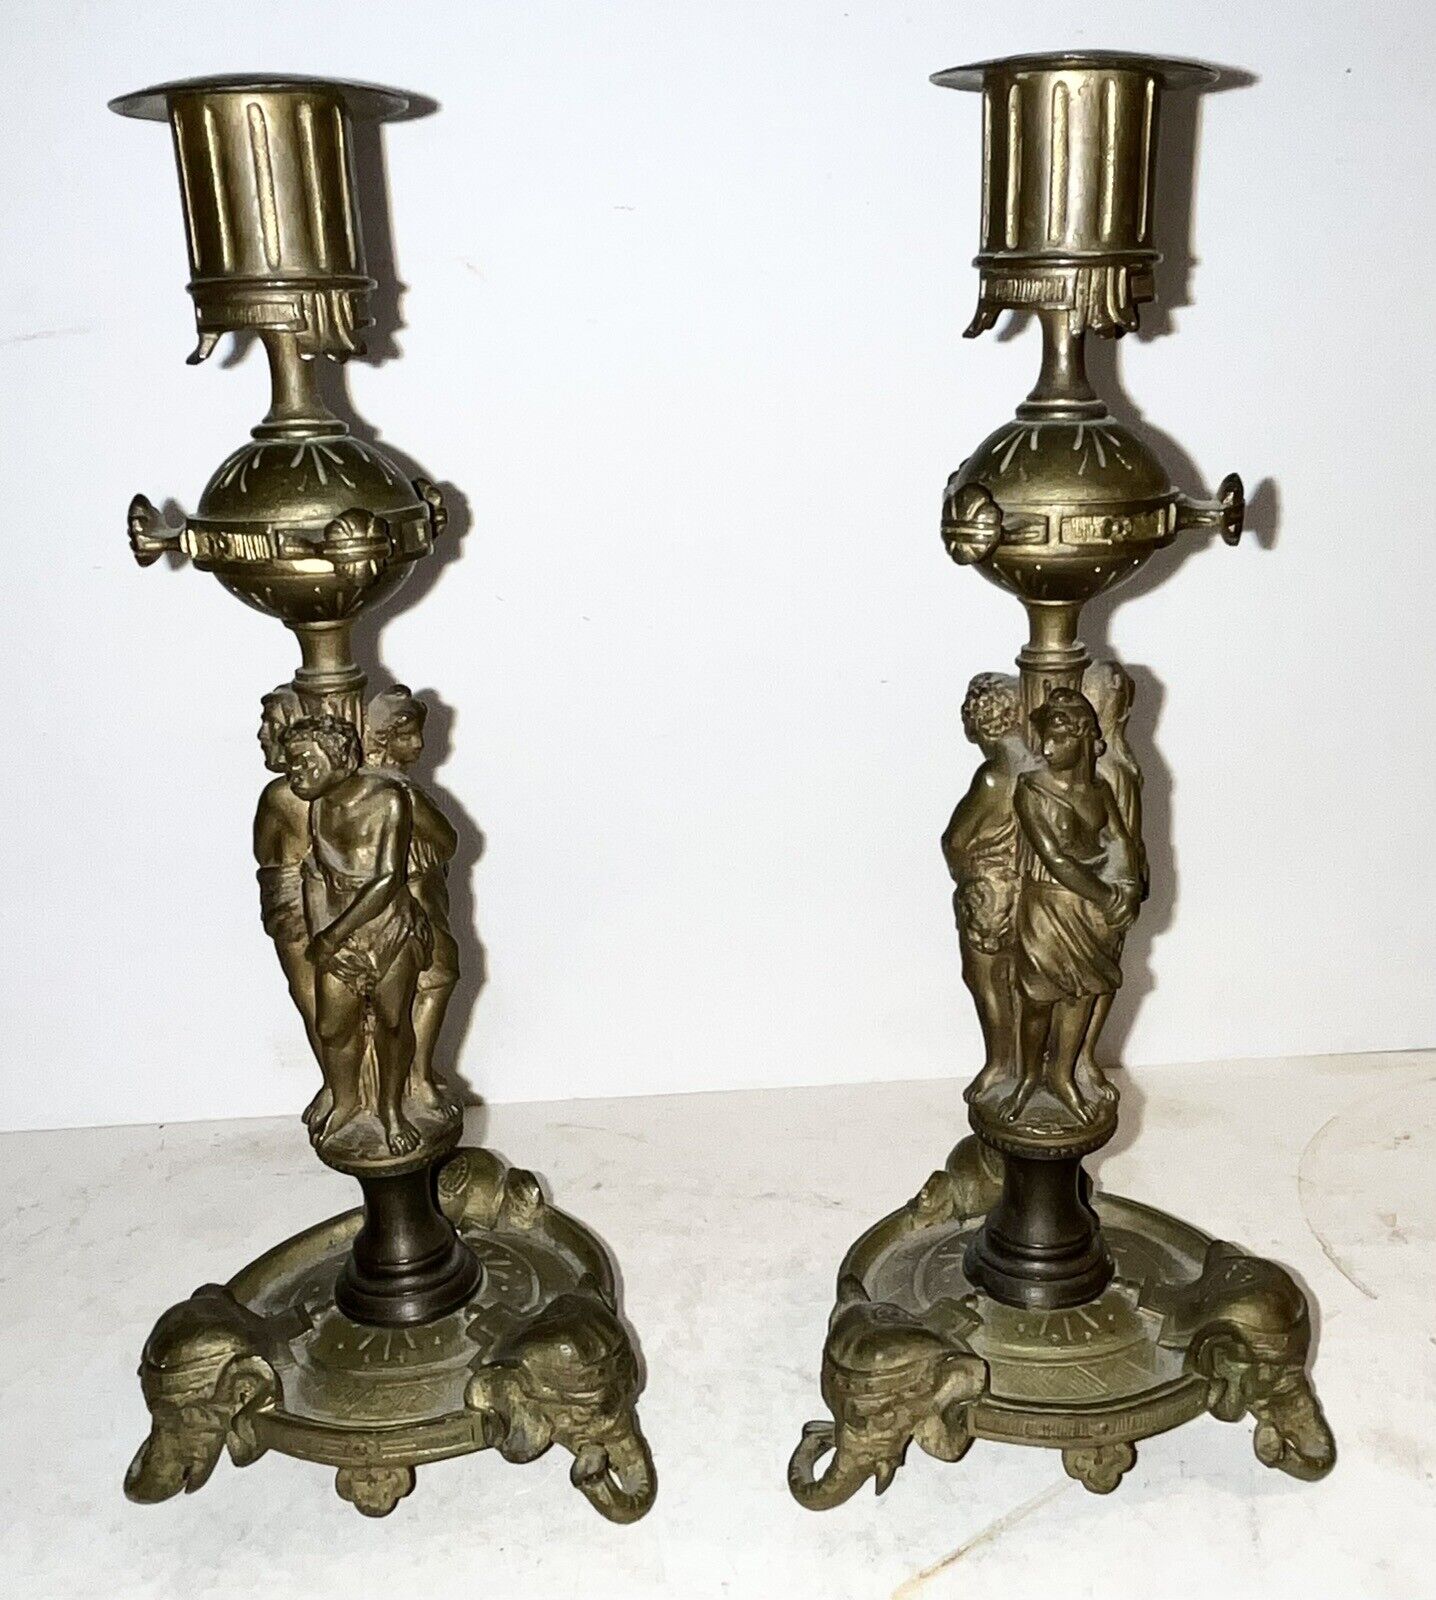 Antique Bronze Candlesticks Figural Chained Slaves on Columns 19th C. Very Fine